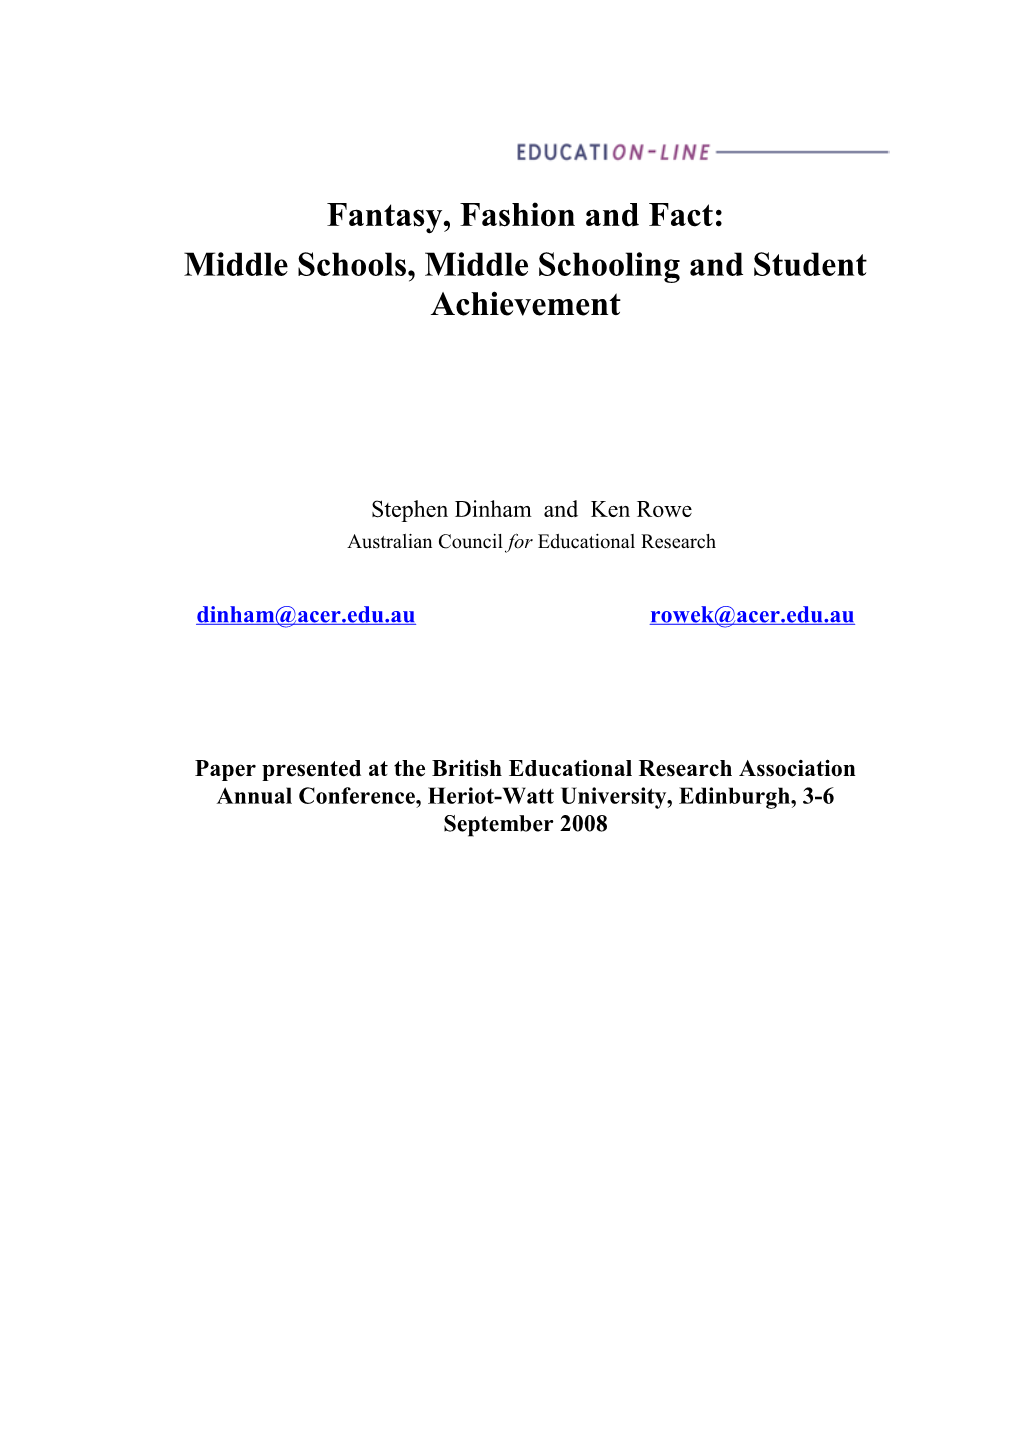 Teaching and Learning Middle Schooling: a Review of the Literature